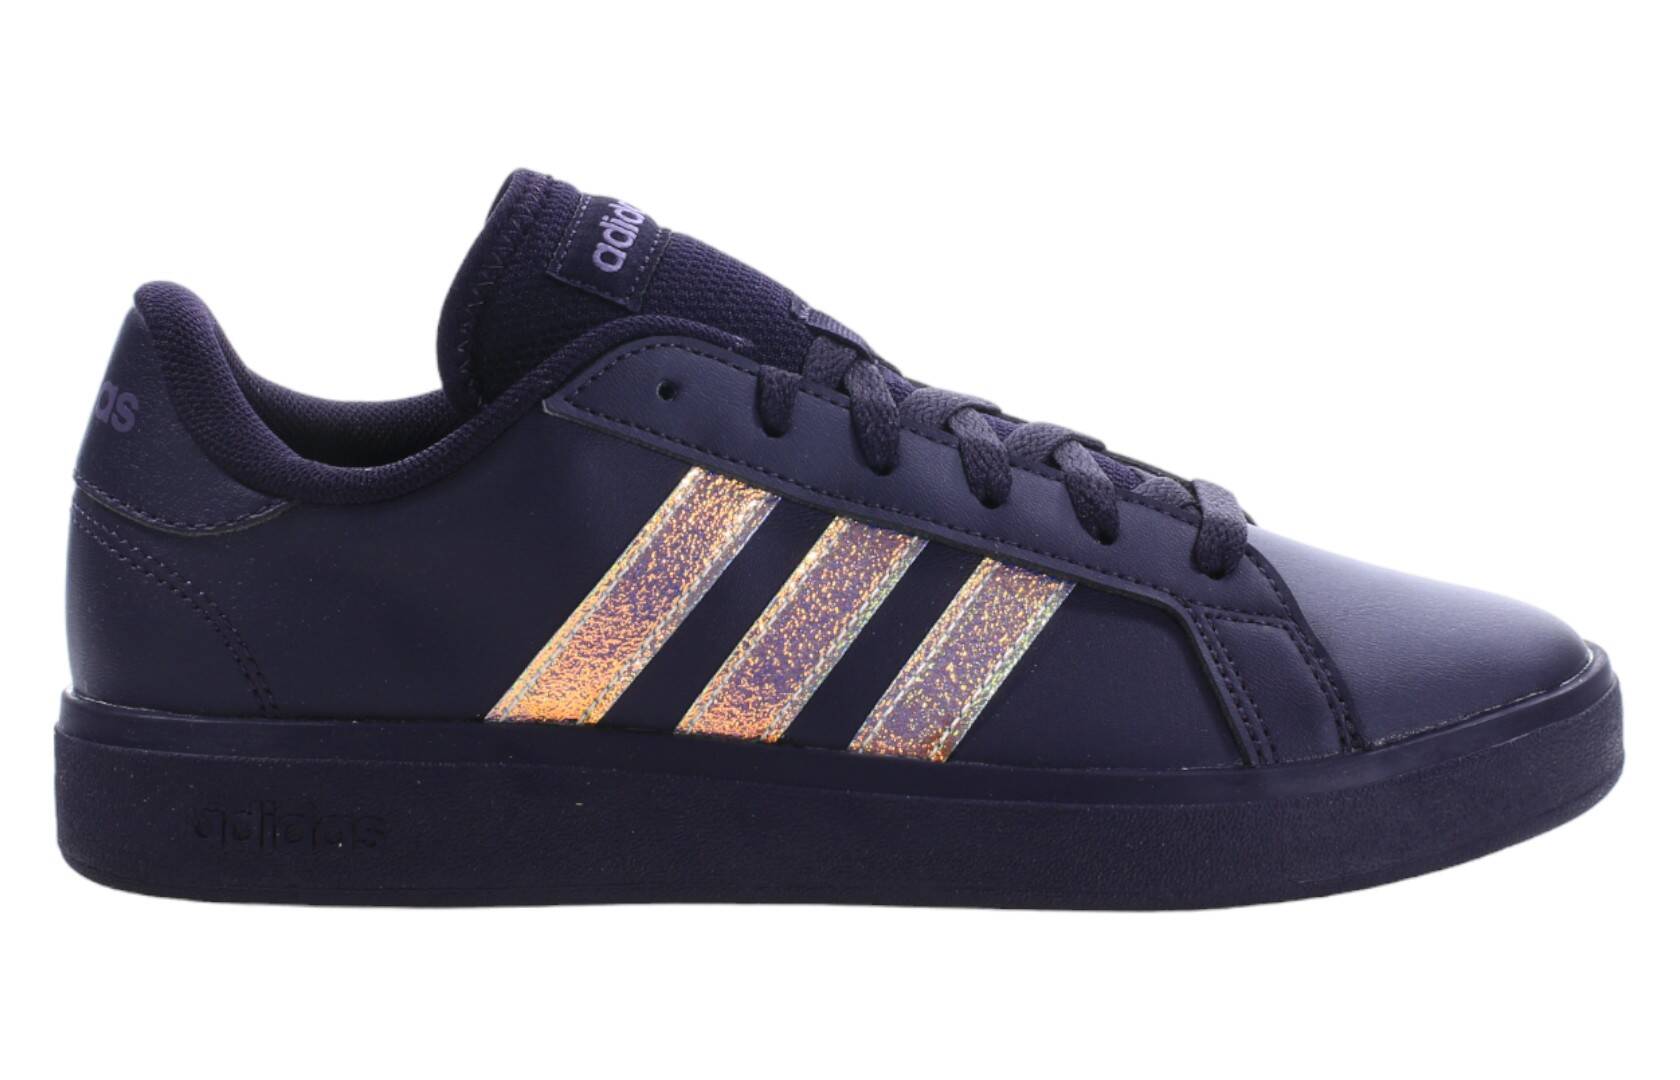 Adidas GRAND COURT BASE 2 women's shoes. ID3043